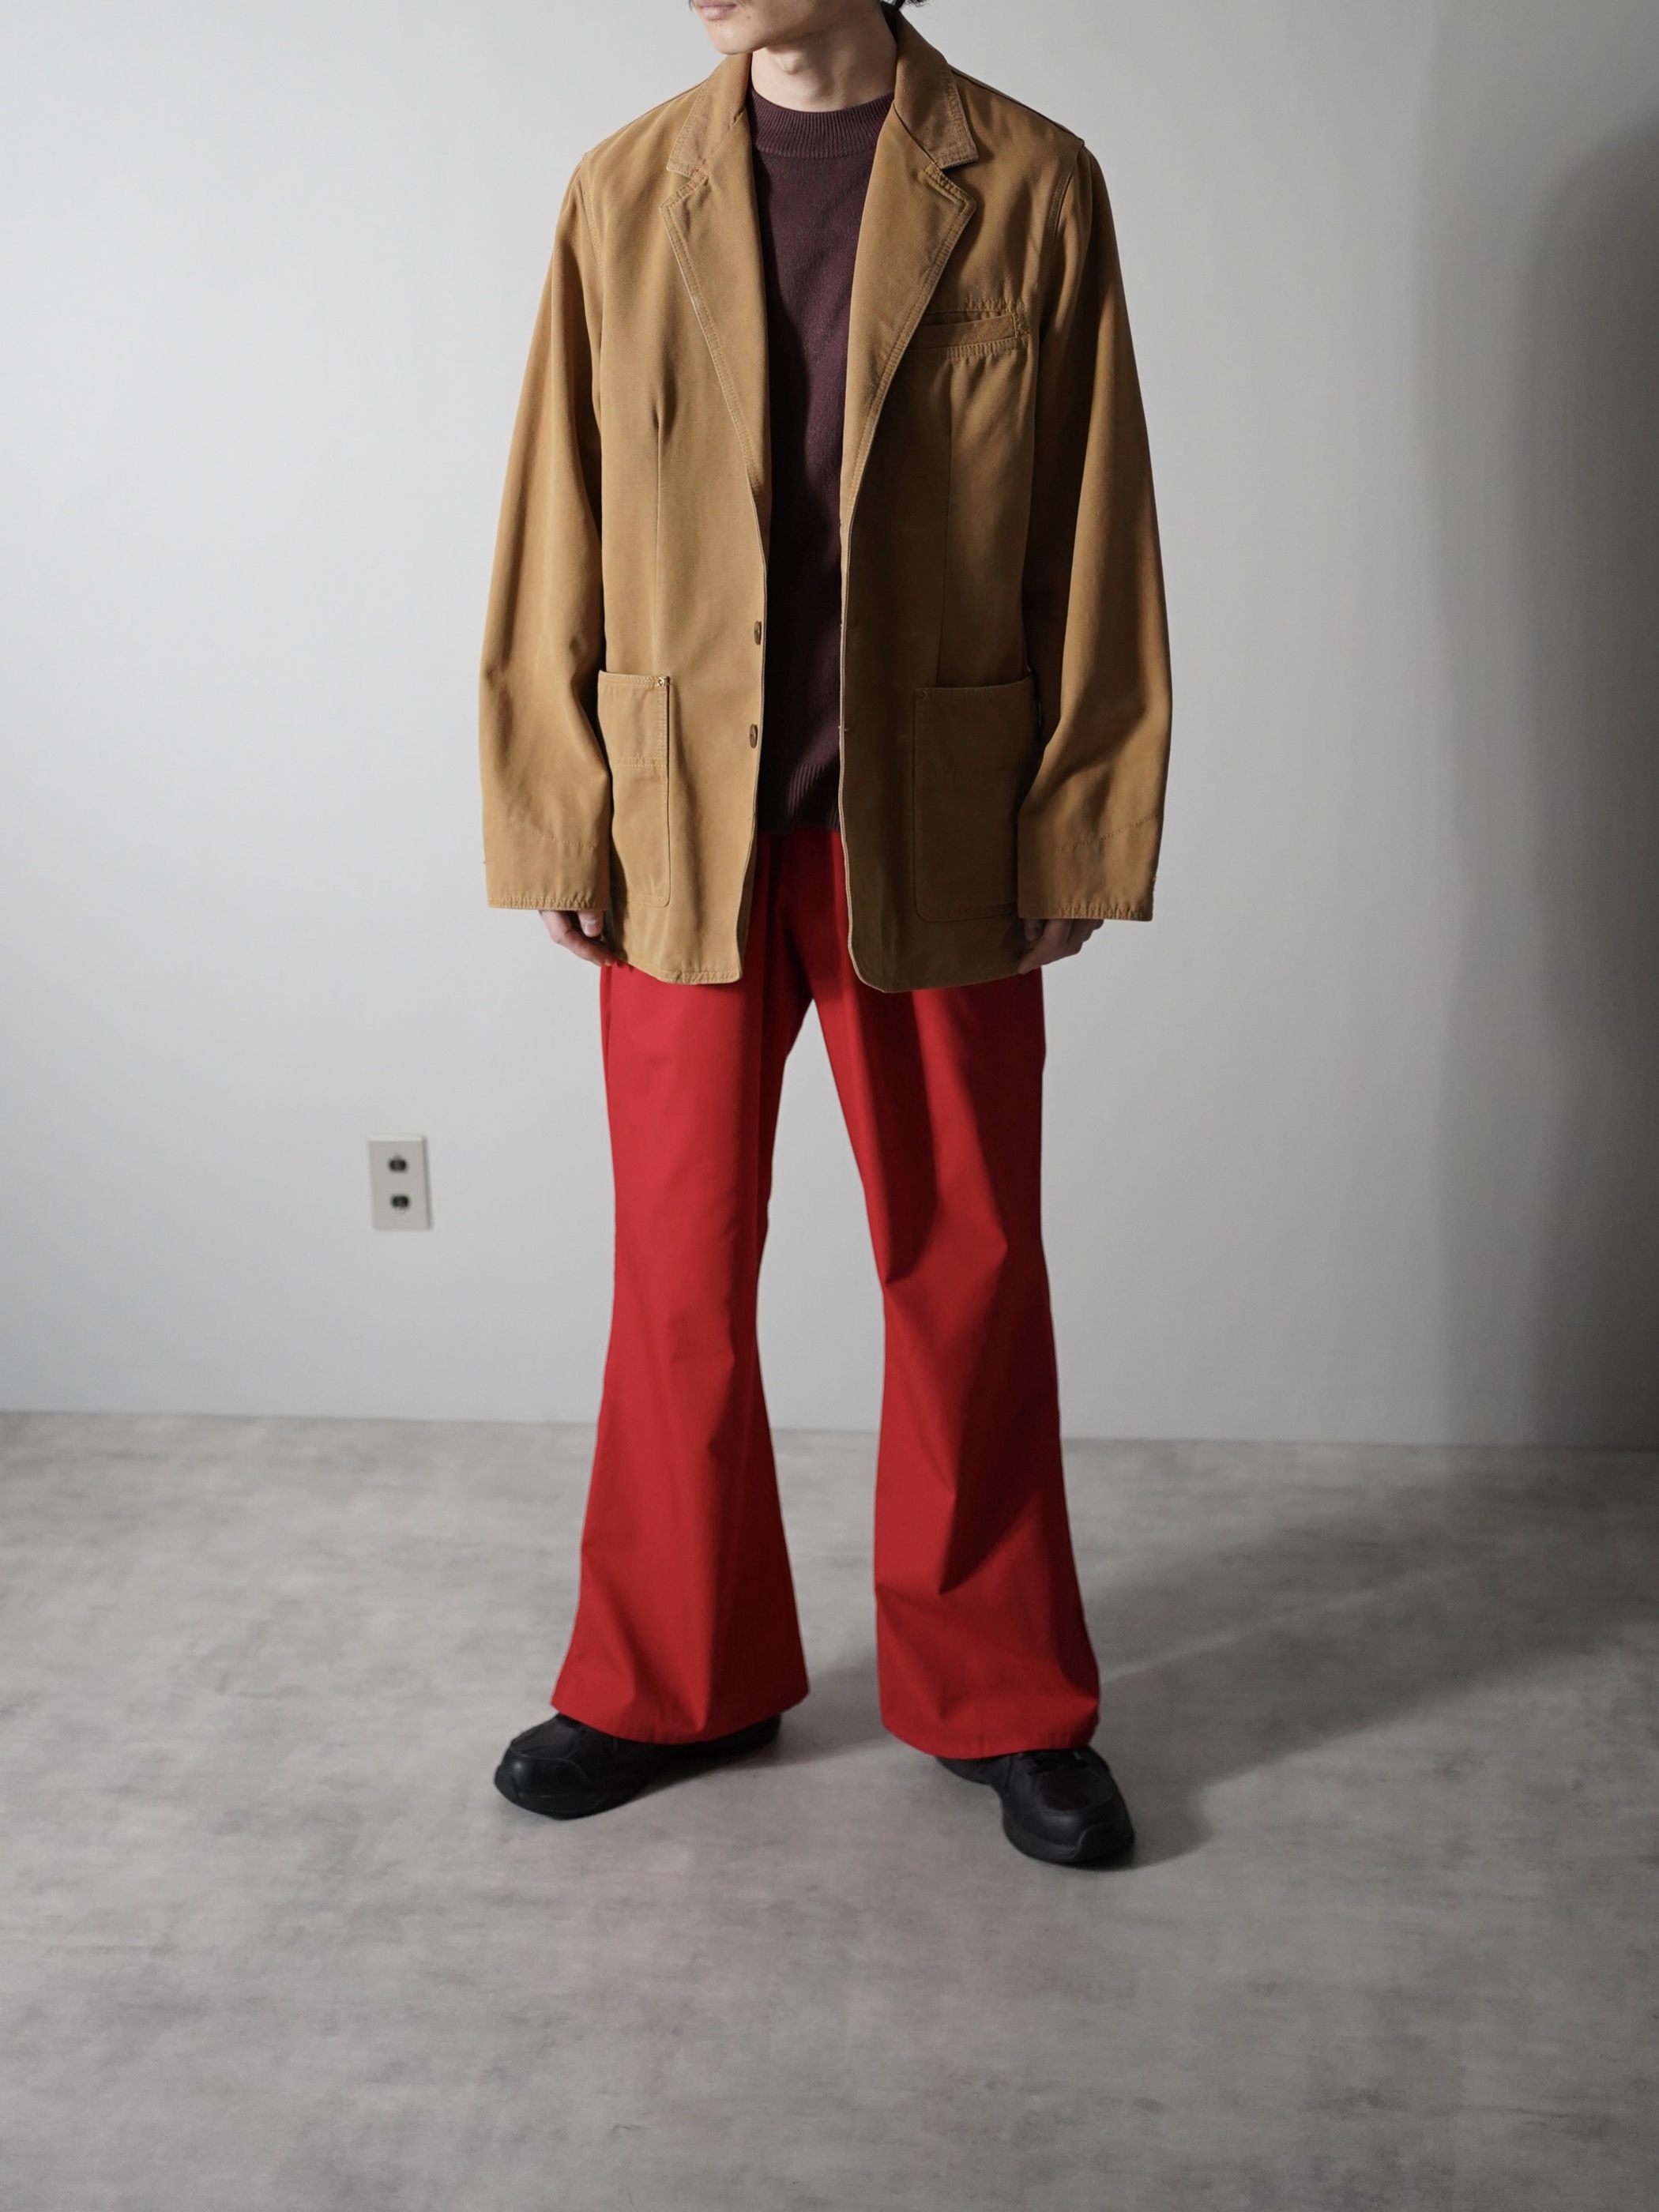 1980's ~ THE TERRITORY AHEAD Cotton casual tailored jacket / Made in Hong Kong